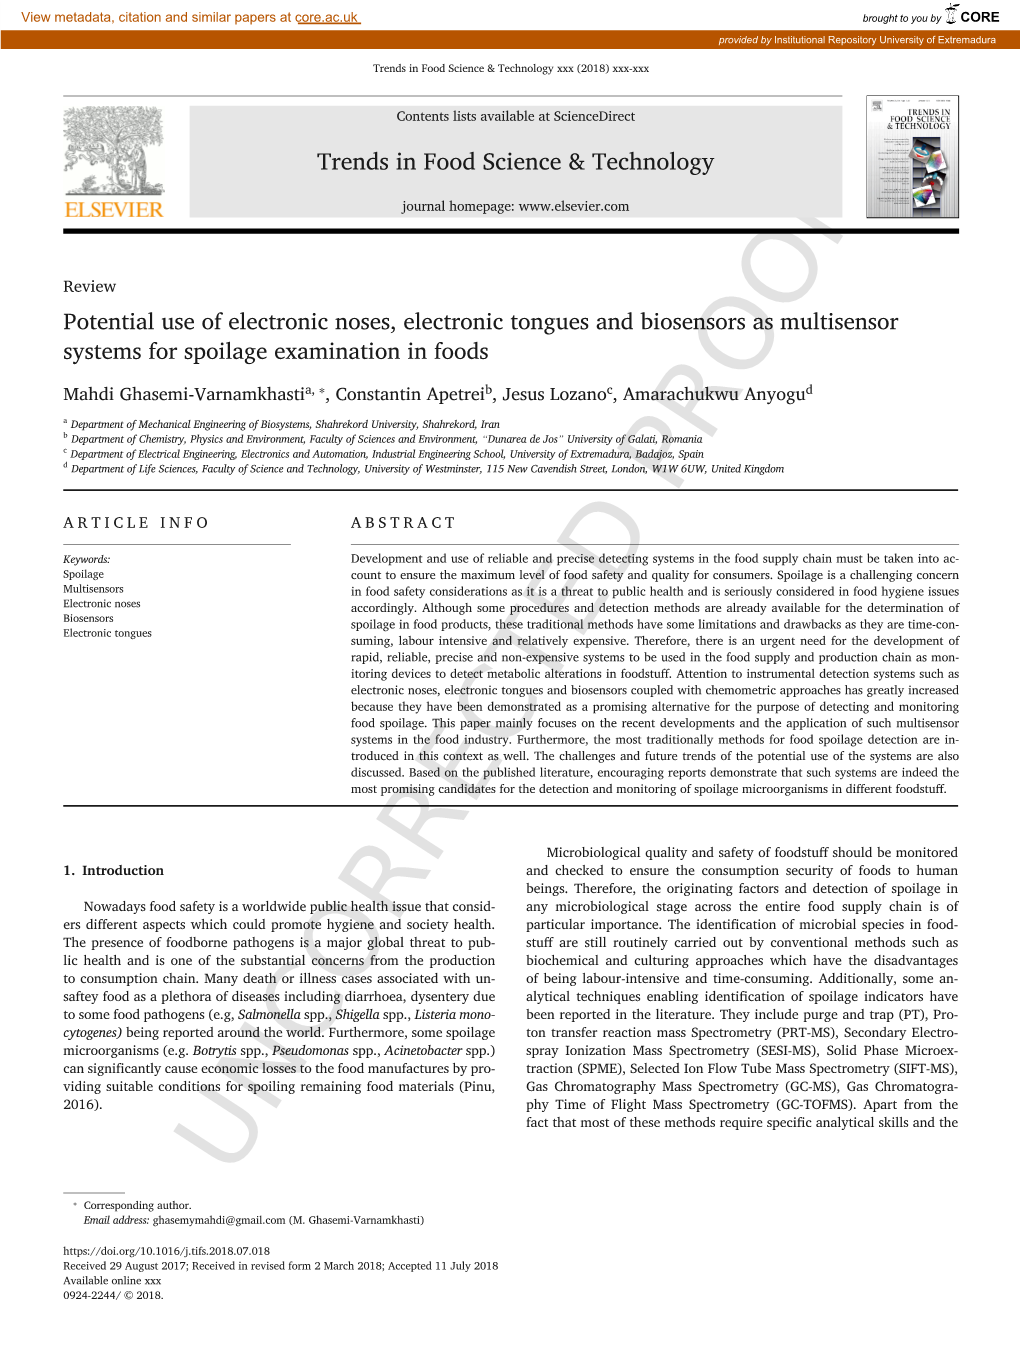 Potential Use of Electronic Noses, Electronic Tongues and Biosensors As Multisensor Systems for Spoilage Examination in Foods